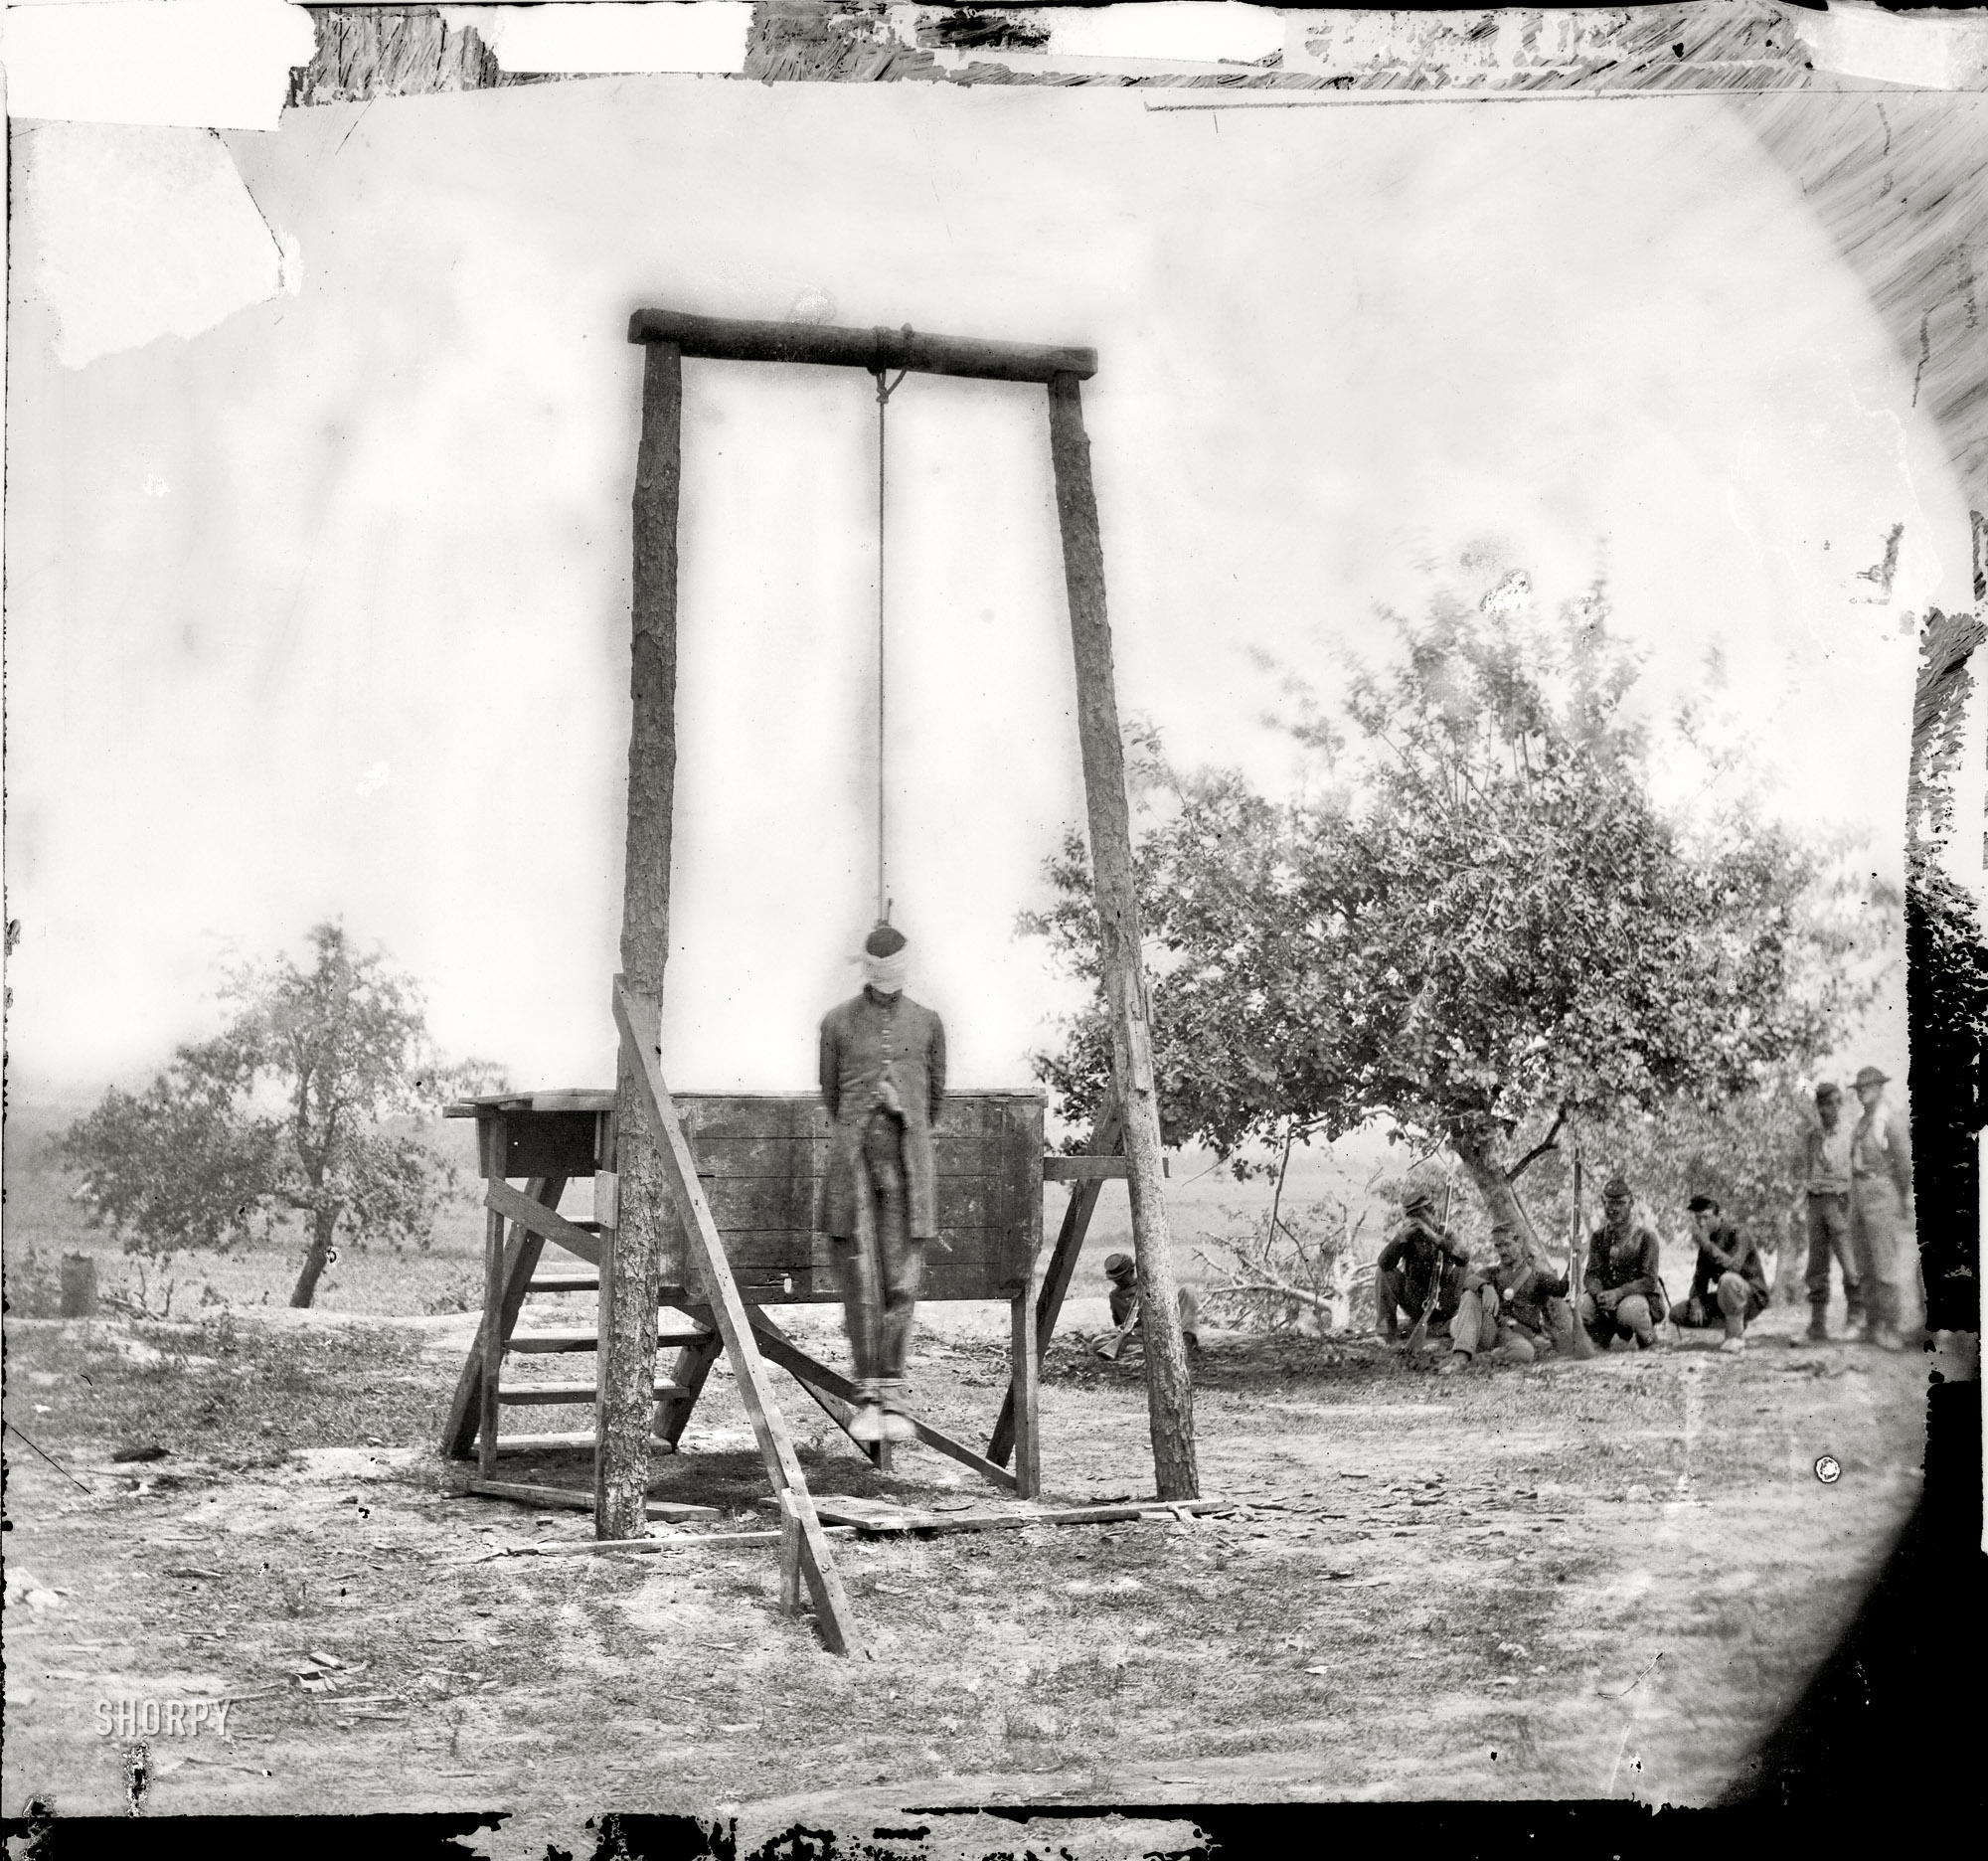 June 20, 1864. Petersburg, Virginia (vicinity) "The execution of Sergeant William Johnson, Negro soldier, at Jordan's farm. Hanged for Desertion and an Attempt to Outrage the Person of a Young Lady at the New-Kent Courthouse." (Supposedly he insulted a white woman and was made an example of to other soldiers who might be considering desertion; the outcome was not what the Federal Army had hoped for.) Wet plate glass negative by Timothy H. O'Sullivan. View full size.